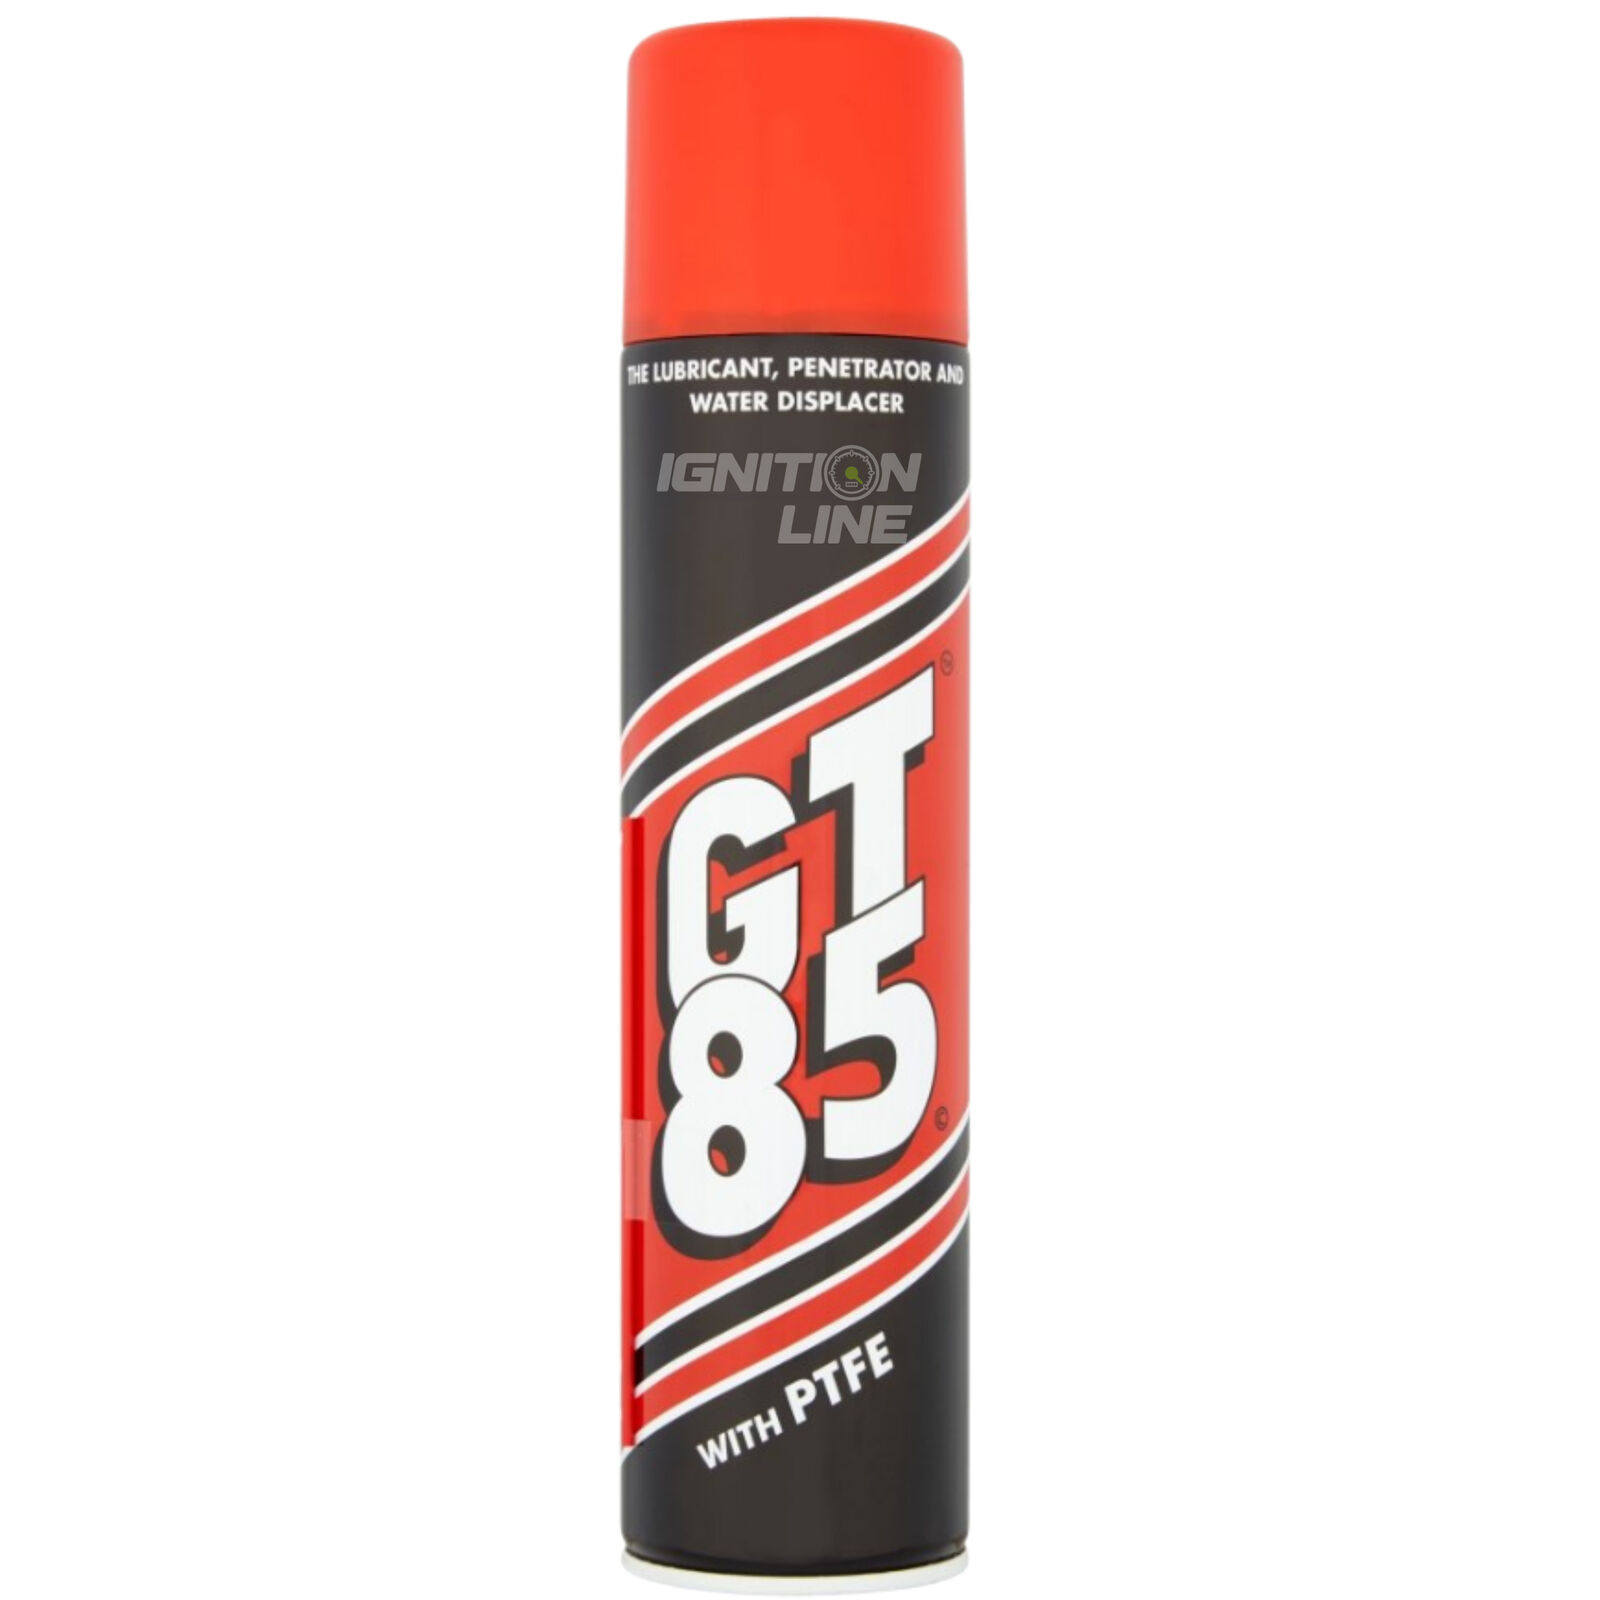 GT85 Spray Chain Lube with PTFE Lubricant Penetrator Water Displacer Corrosio...